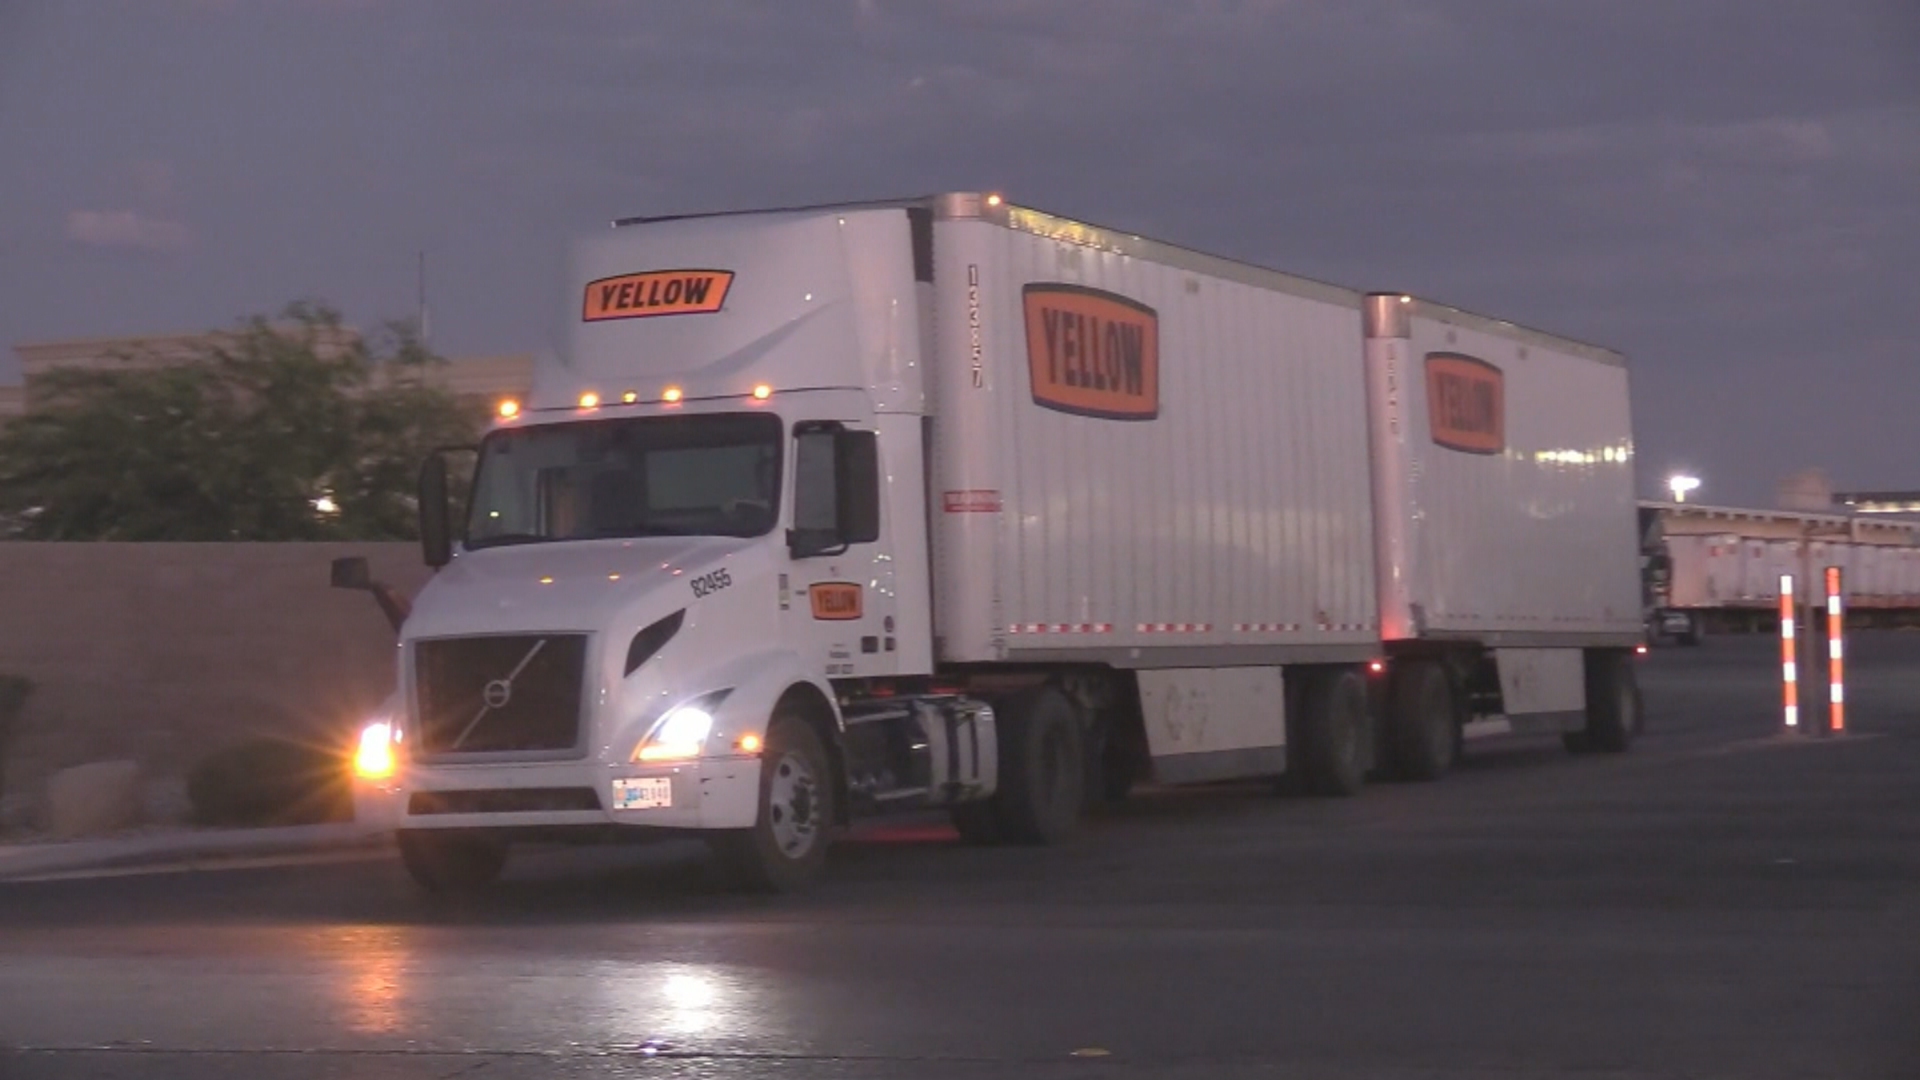 Trucking company Yellow shuts down after 99 years, putting 30,000 out